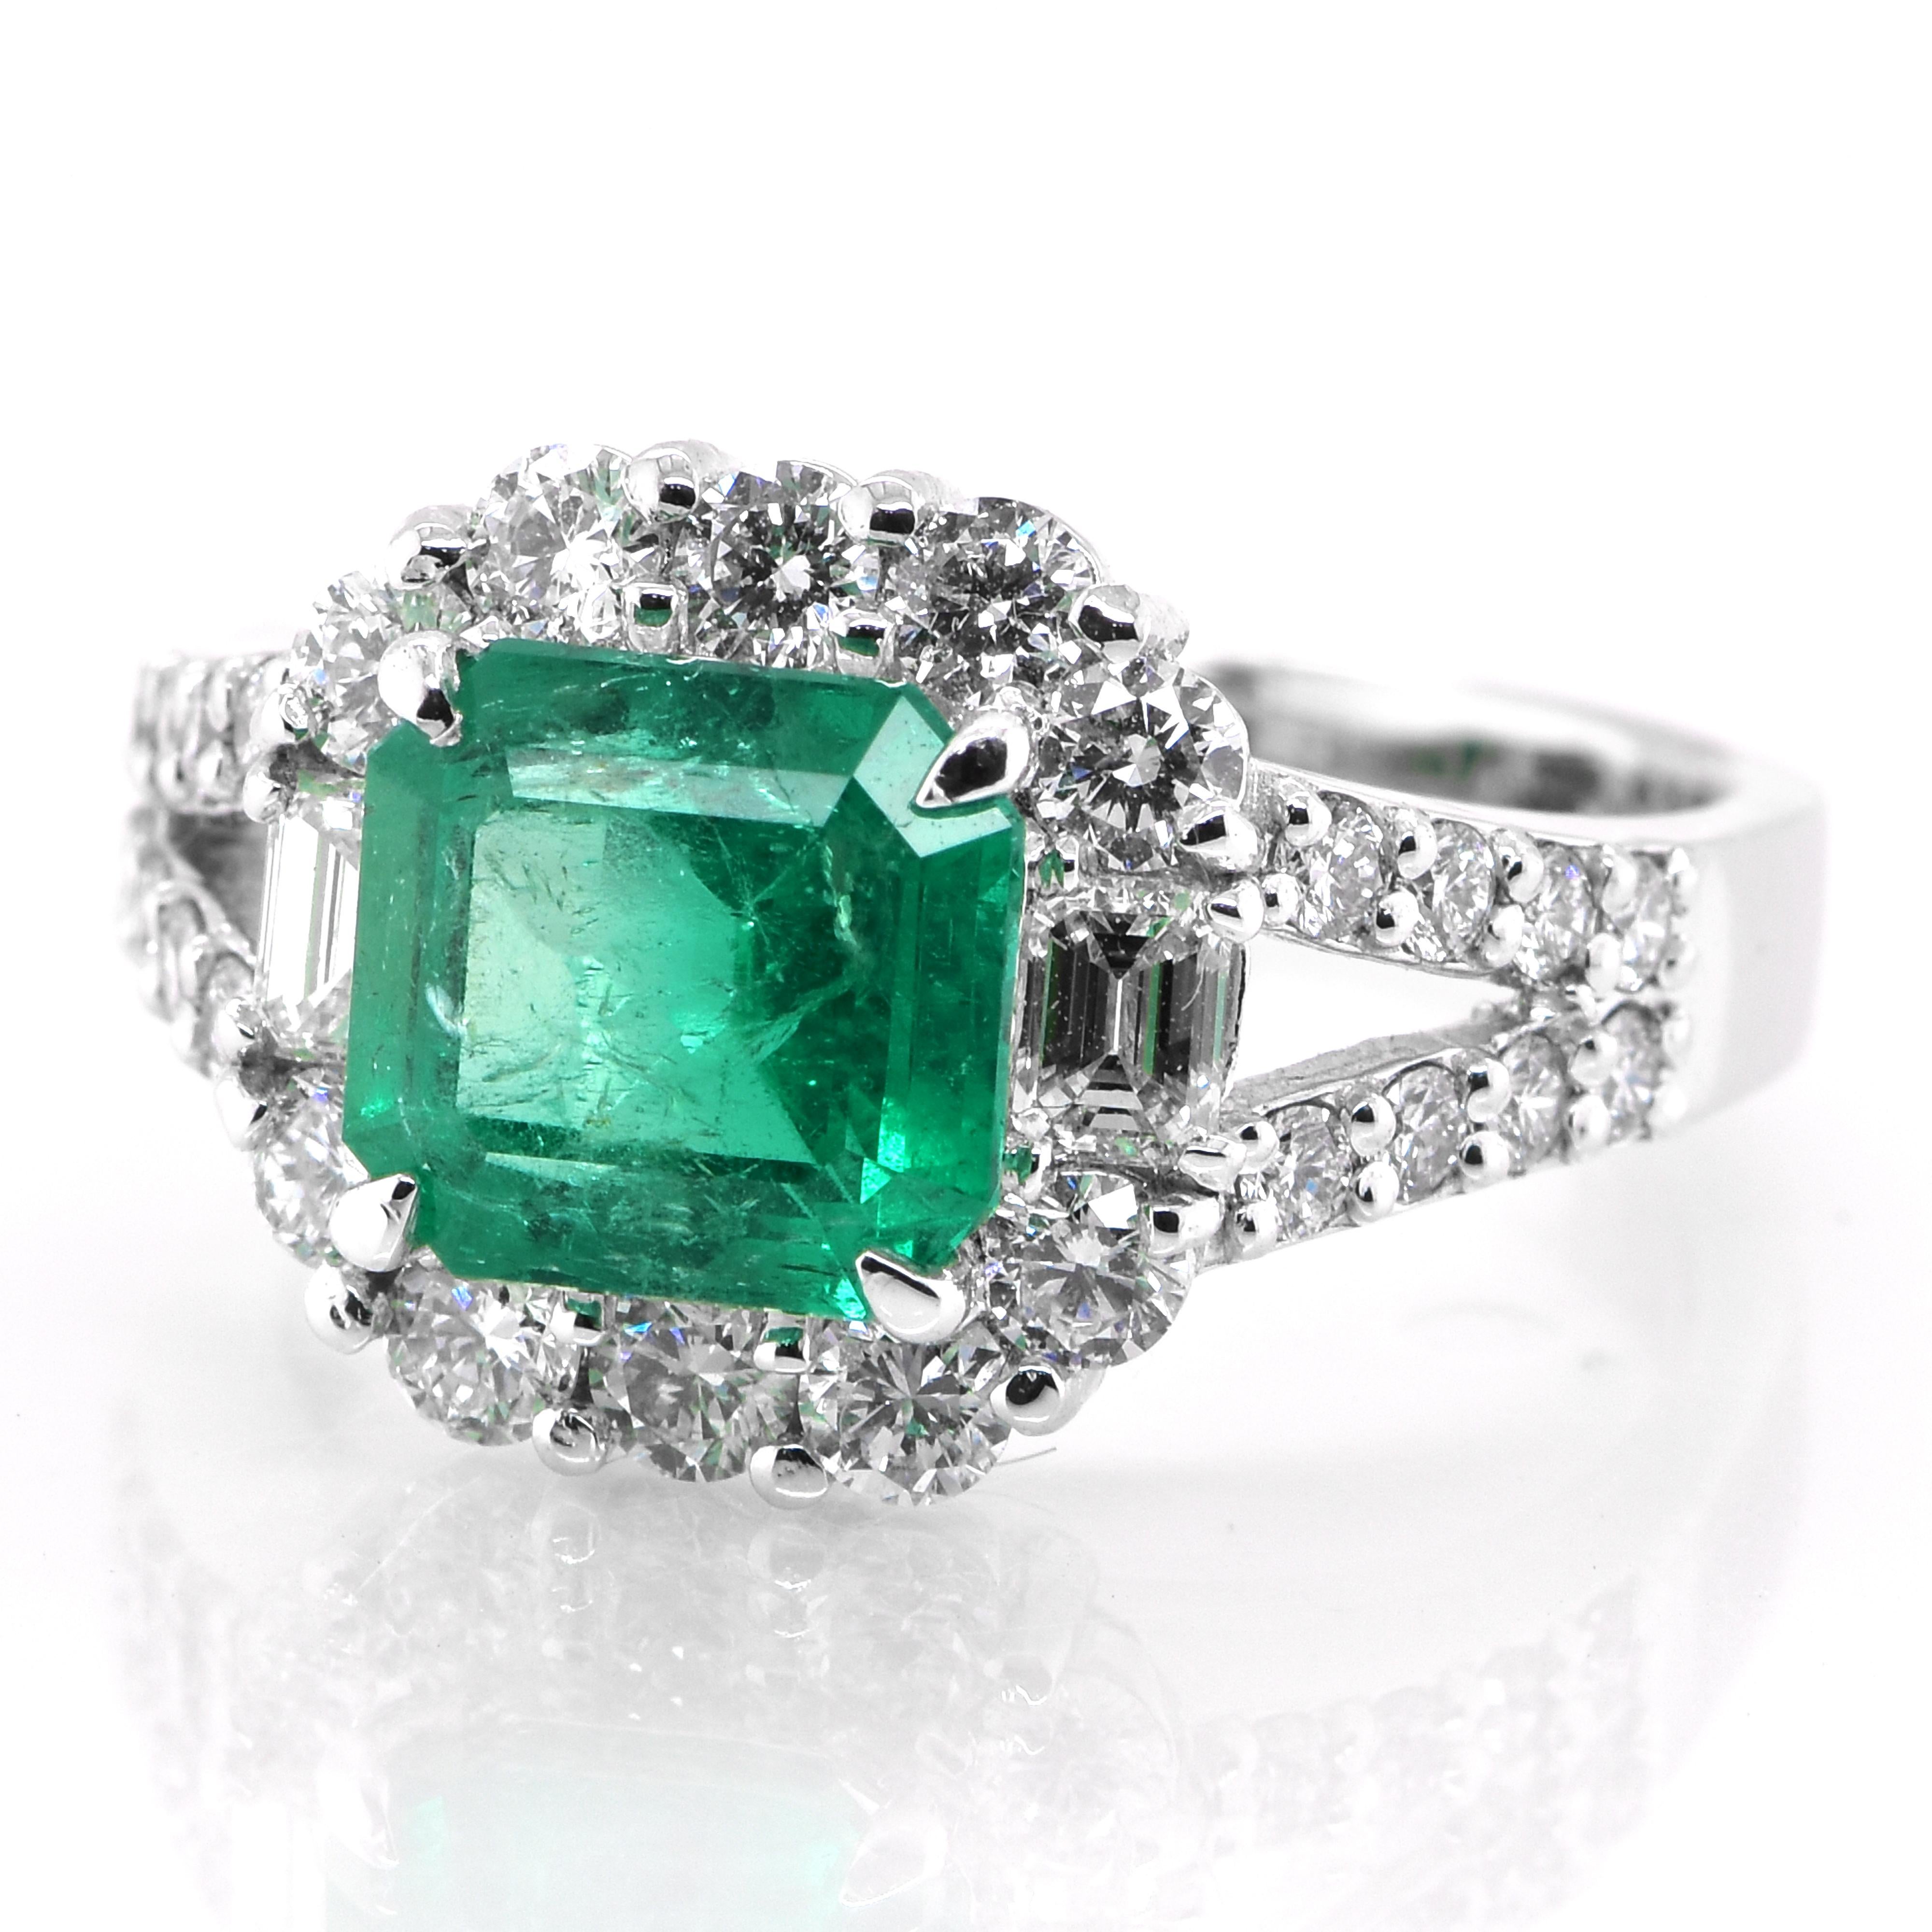 A stunning ring featuring a 1.97 Carat Natural Emerald and 1.10 Carats of Diamond Accents set in Platinum. People have admired emerald’s green for thousands of years. Emeralds have always been associated with the lushest landscapes and the richest